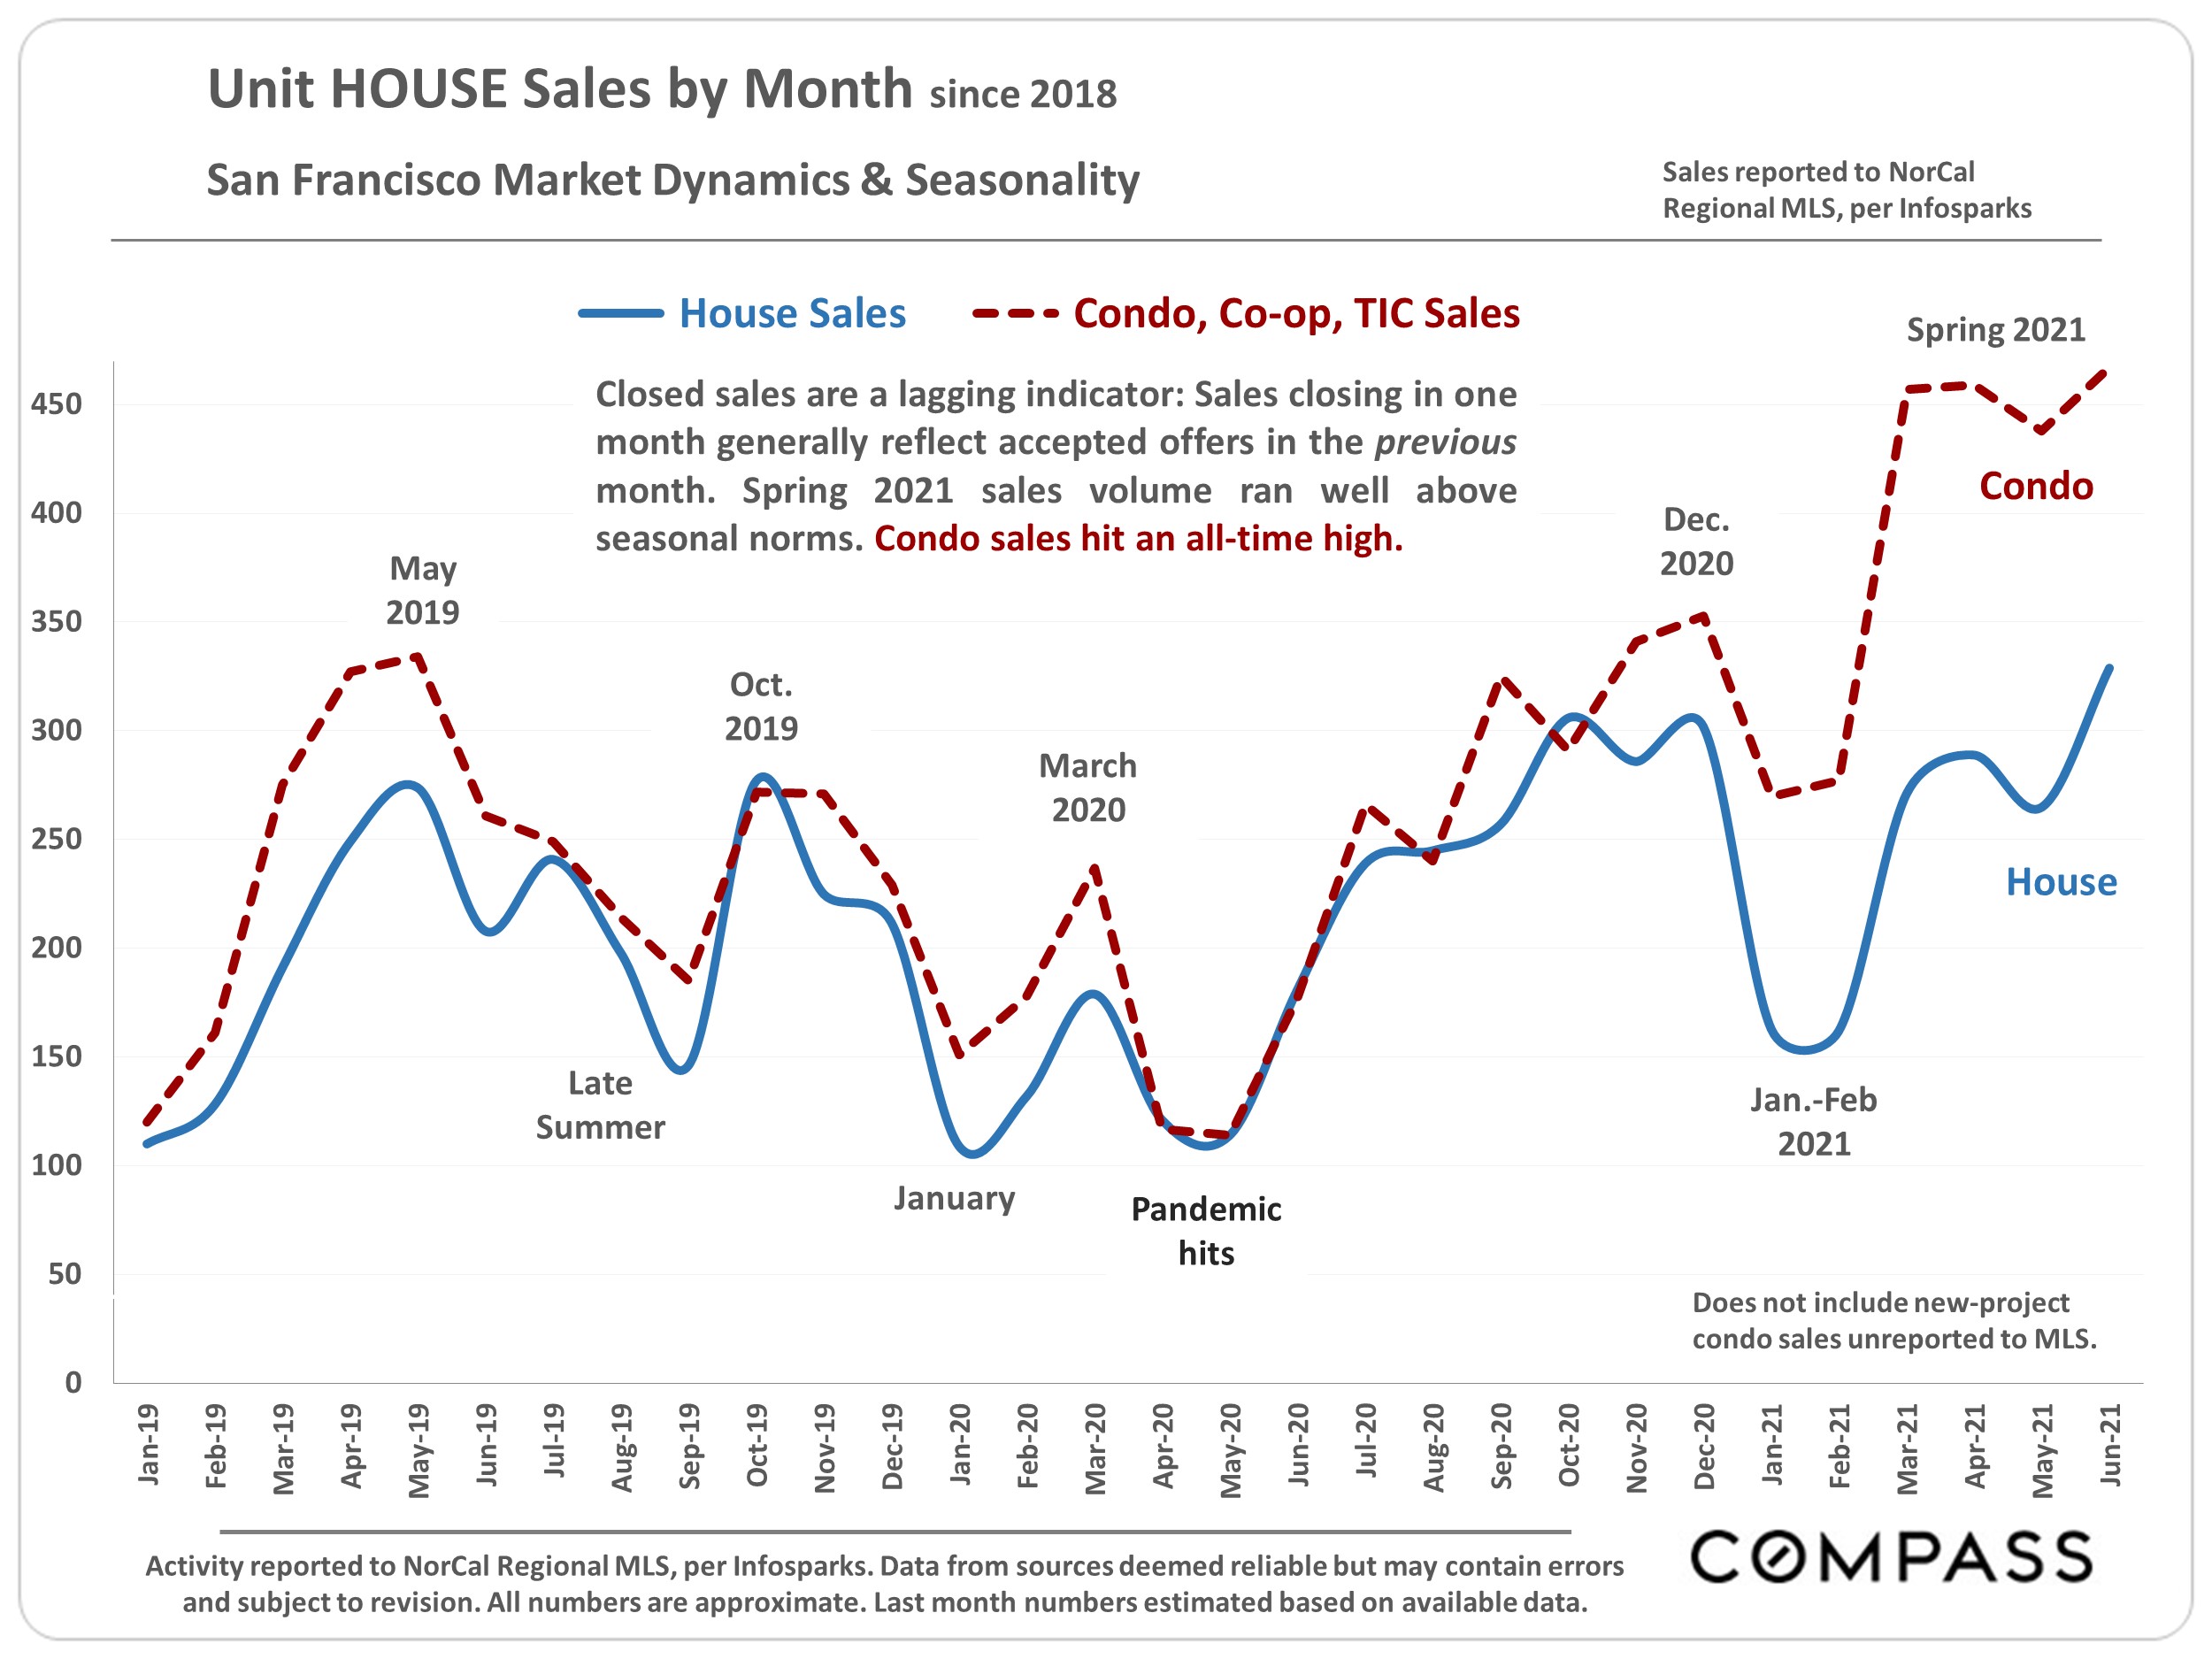 Graph of Unit house sales by month since 2018, San Francisco house/condo/co-op/TIC, San Francisco Market Dynamics and Seasonality